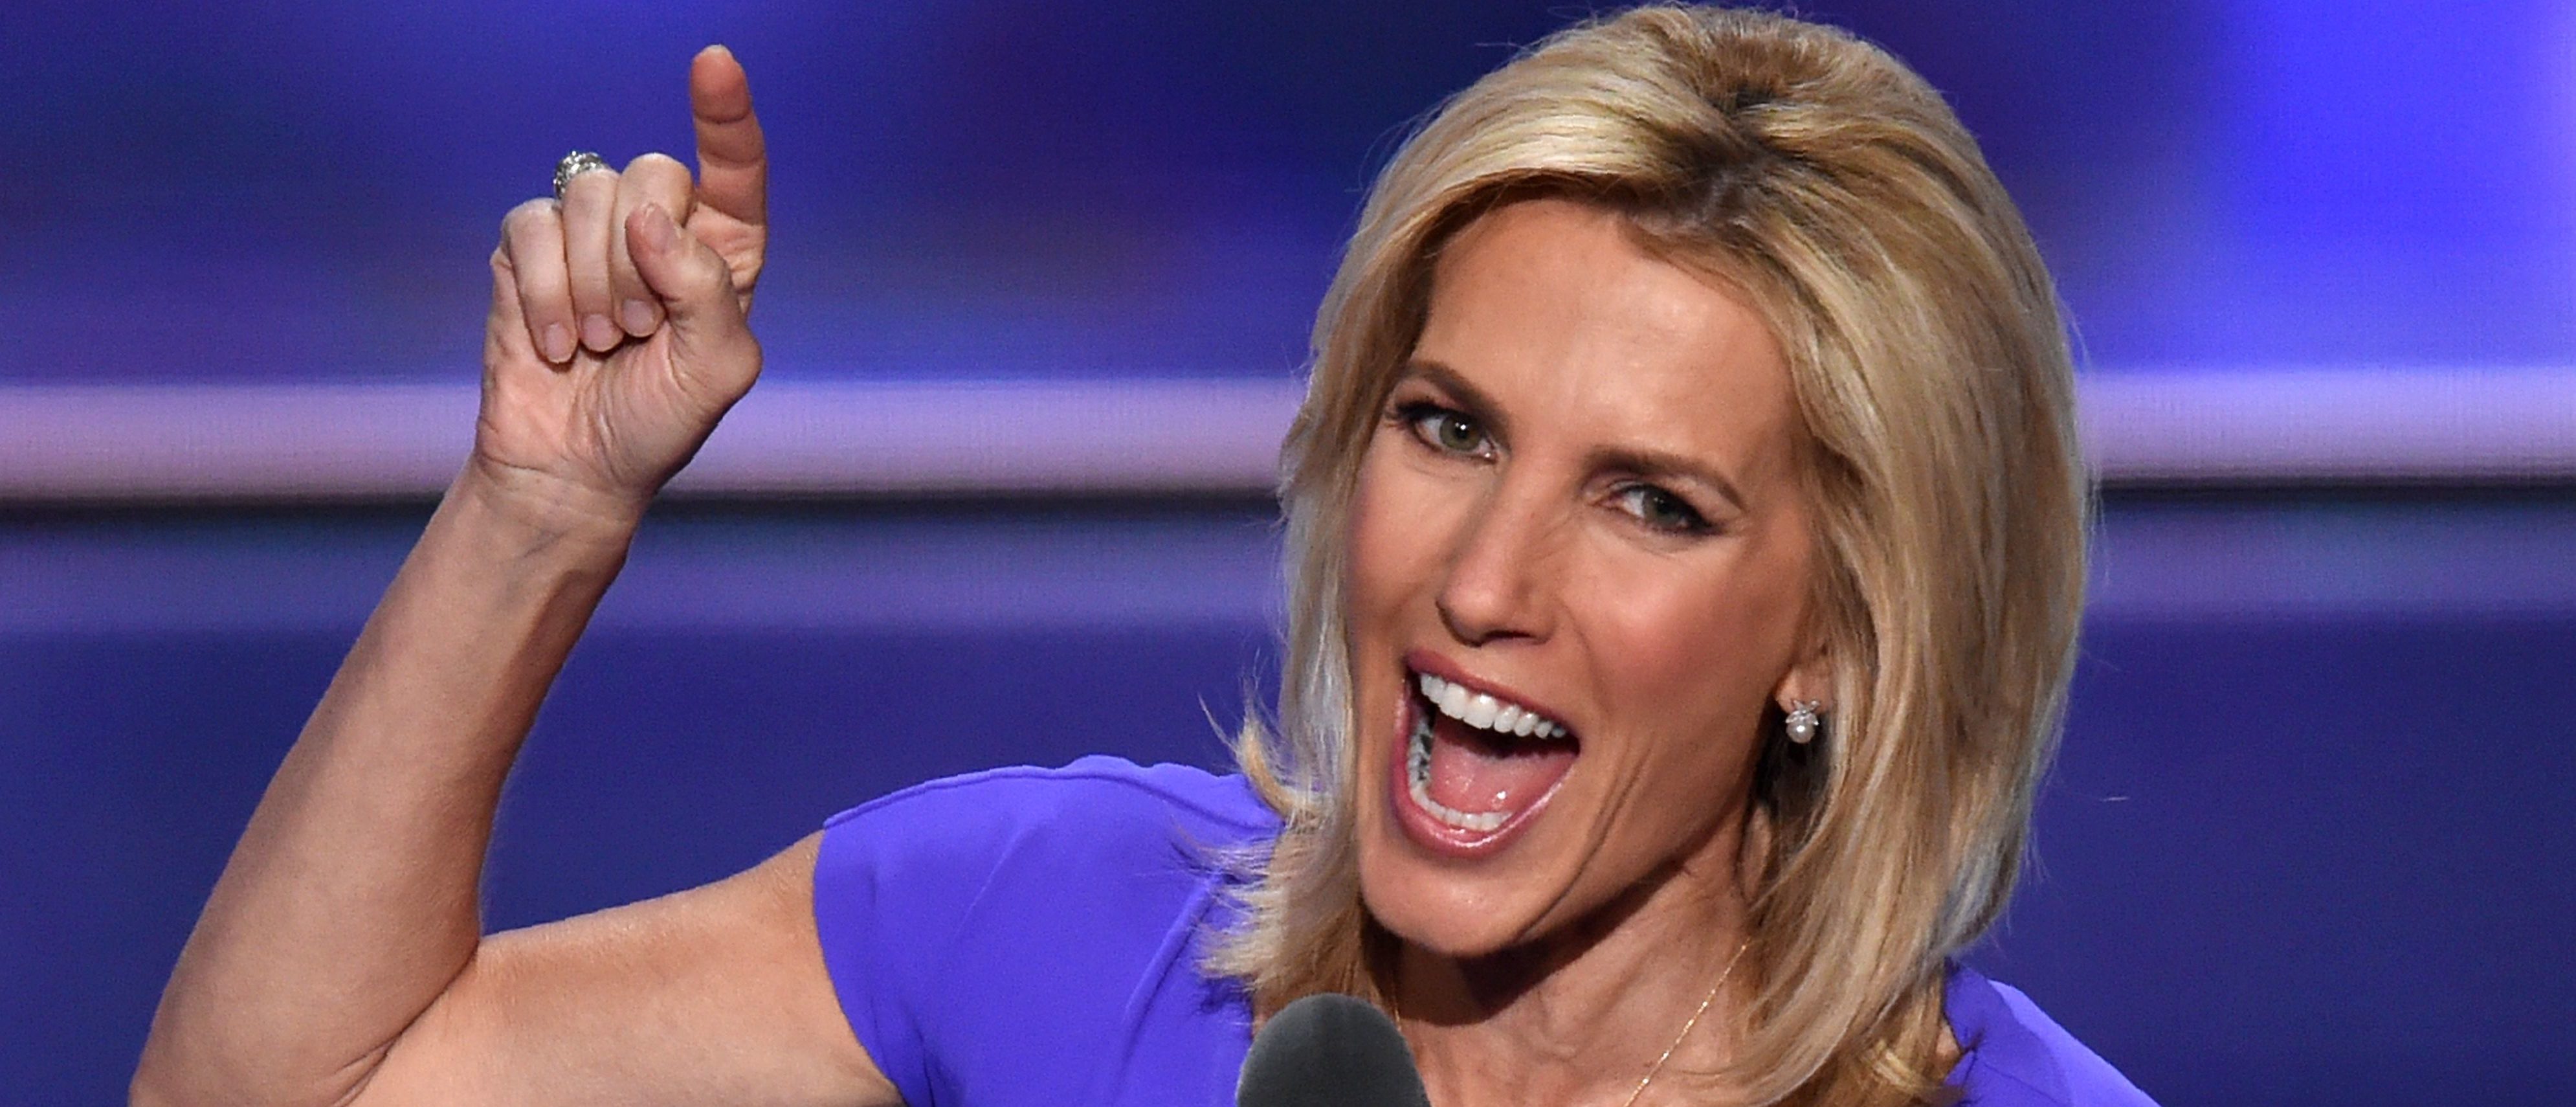 Radio Host Laura Ingraham speaks on the third day of the Republican National Convention in Cleveland, Ohio, on July 20, 2016. / AFP / Timothy A. CLARY        (Photo credit should read TIMOTHY A. CLARY/AFP/Getty Images)